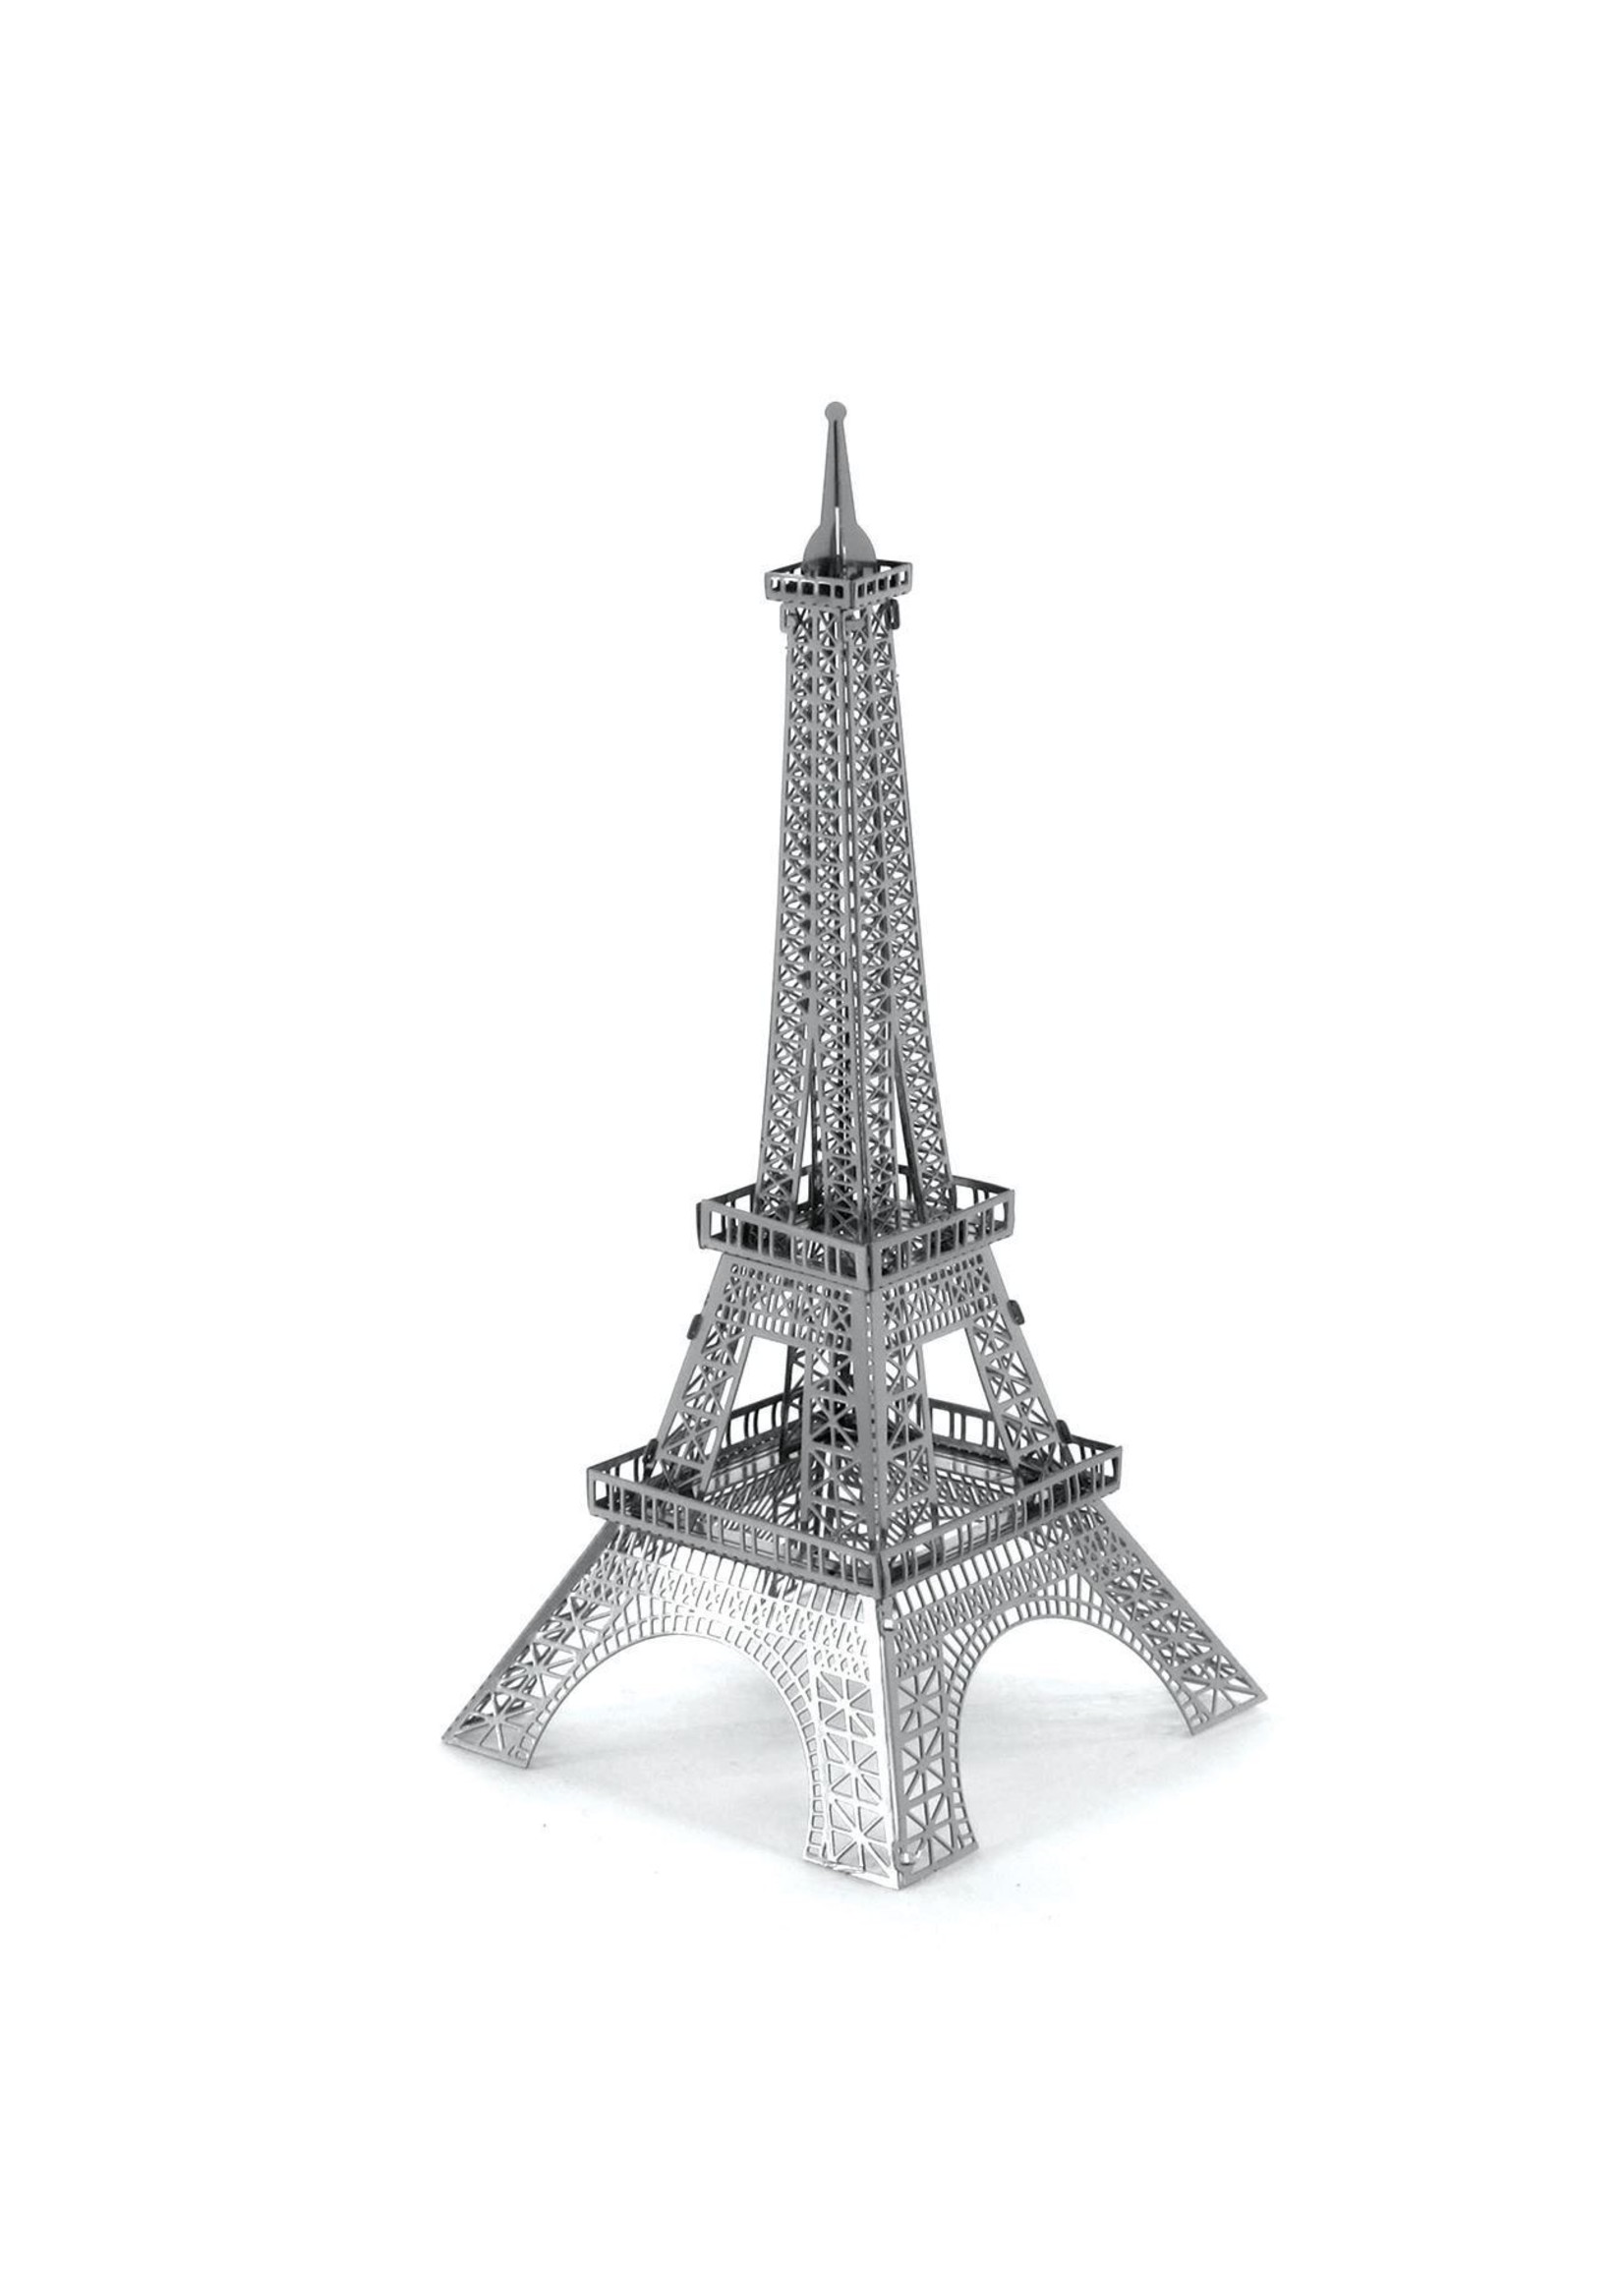 Fascinations Metal Earth - The Eiffel Tower